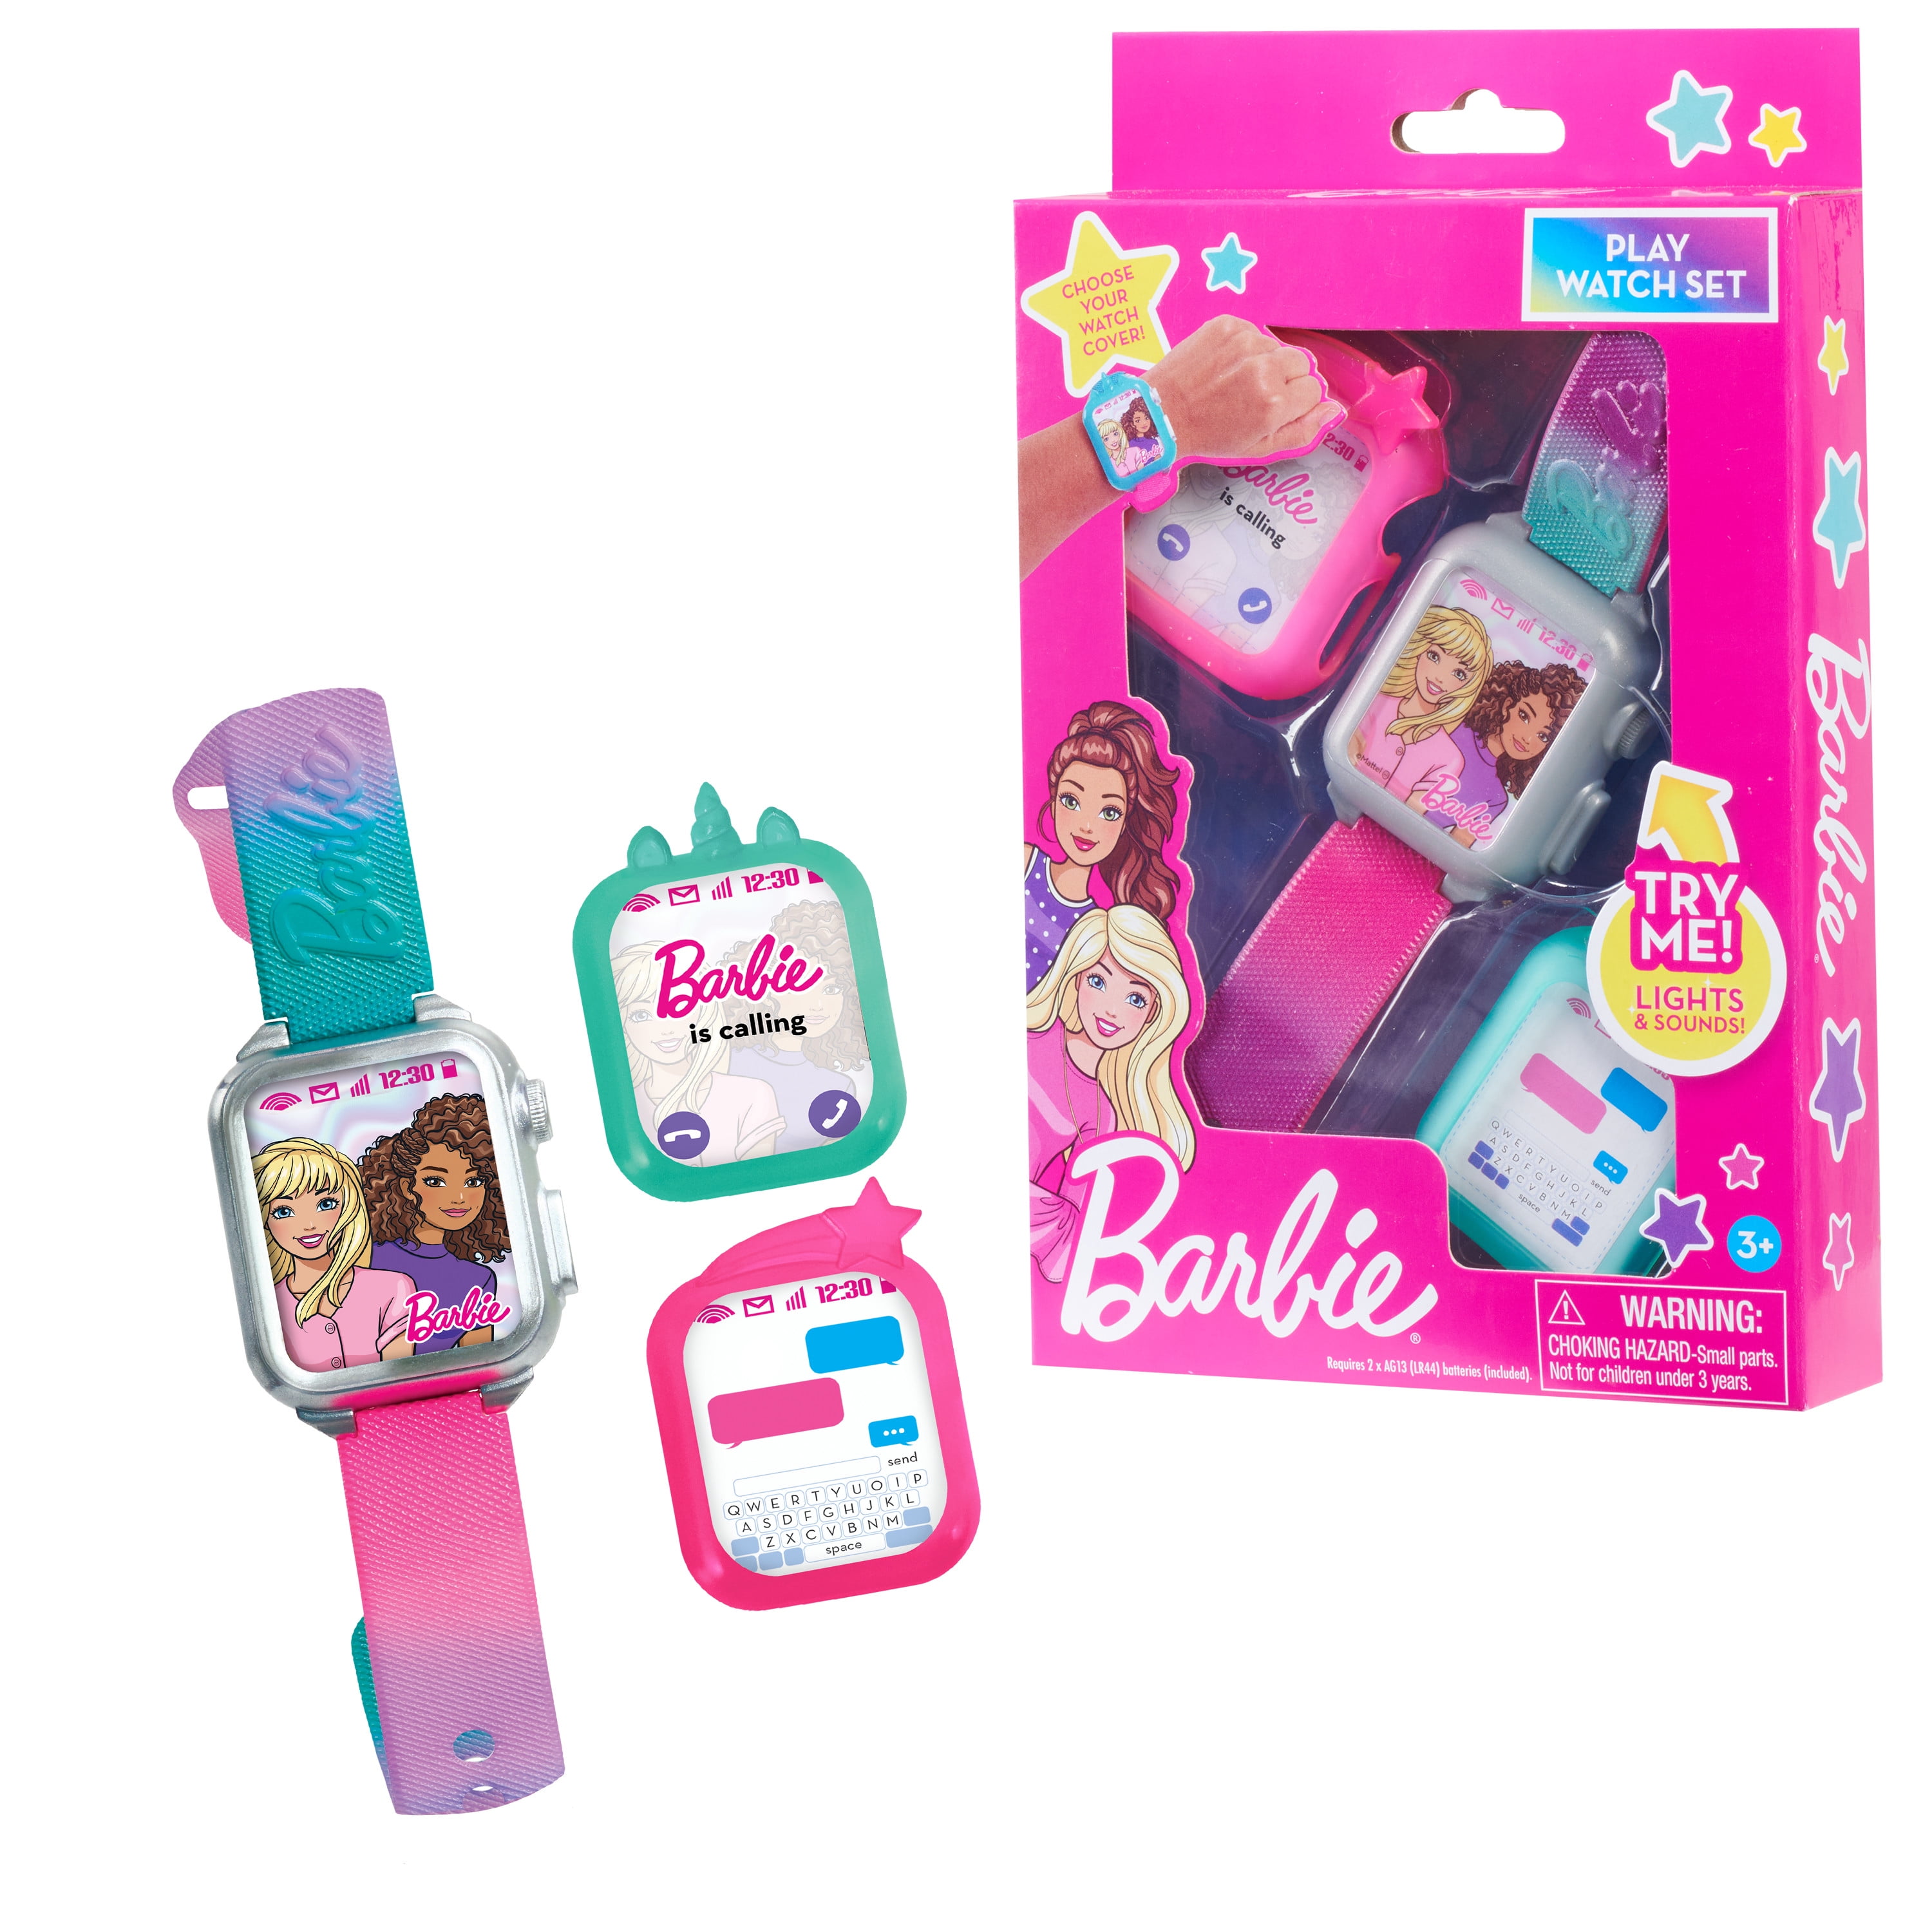 Barbie Electronic Toy with Lights, Sounds, and 2 Changeable Covers, Unicorn or Shooting Star, Kids Toys for Ages 3 Up, Gifts Presents -